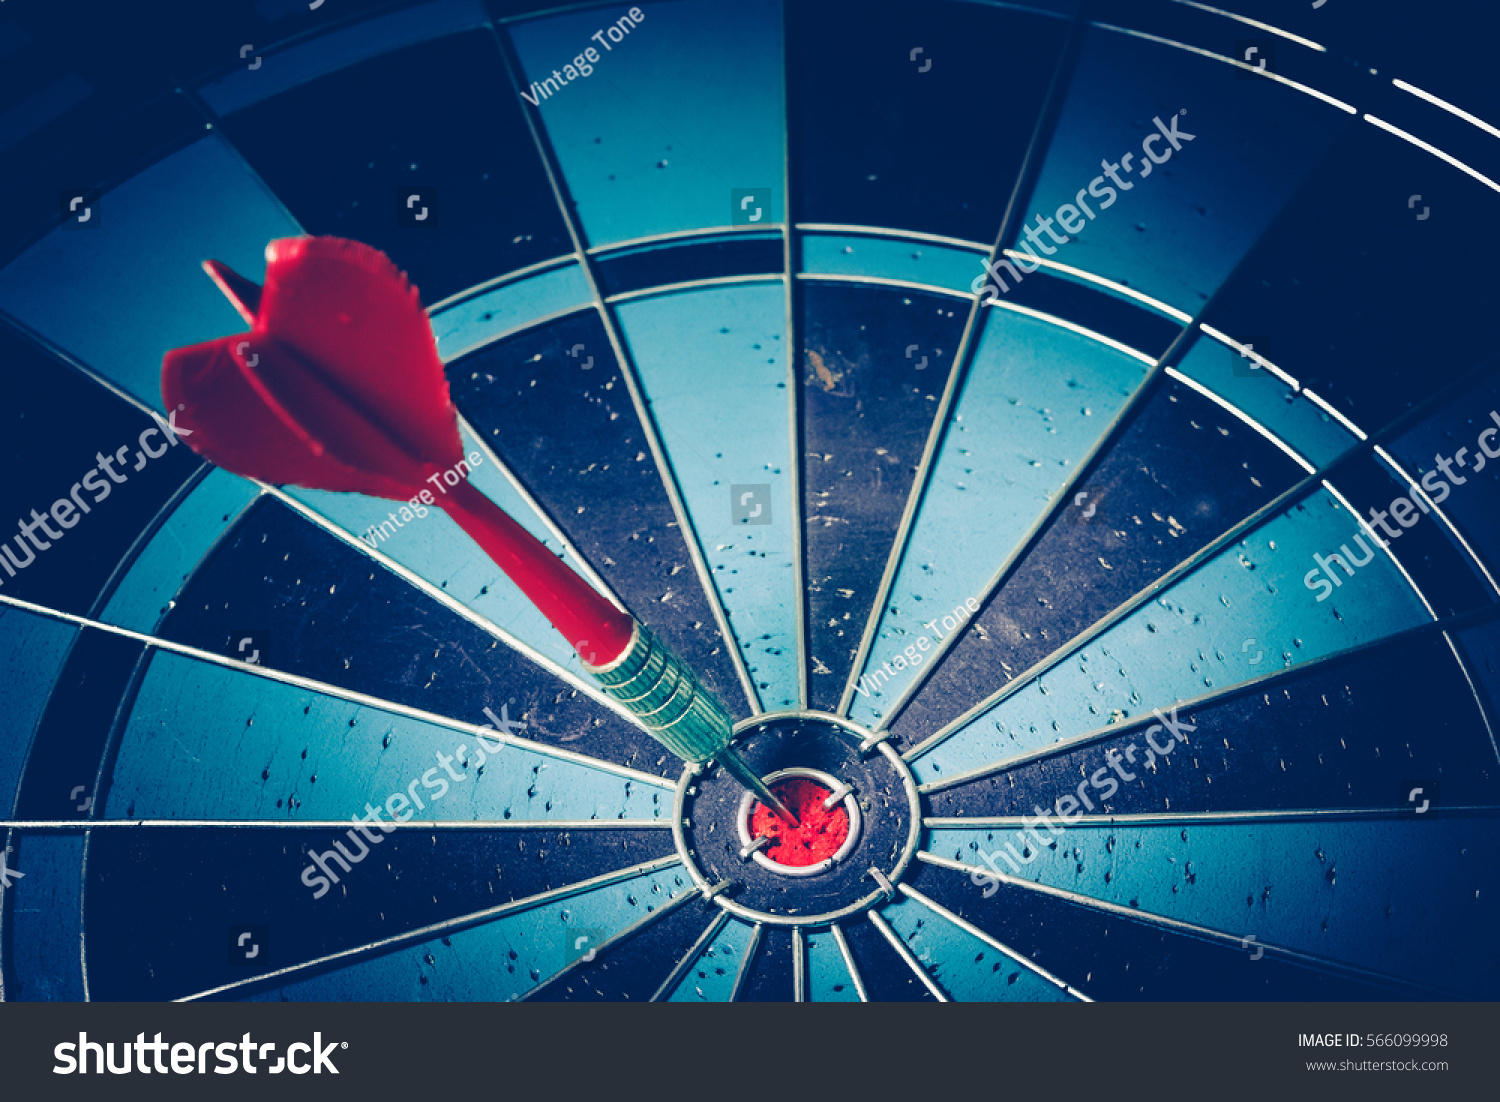 Bullseye is a target of business. Dart is an opportunity and Dartboard is the target and goal. So both of that represent a challenge in business marketing as concept. #566099998